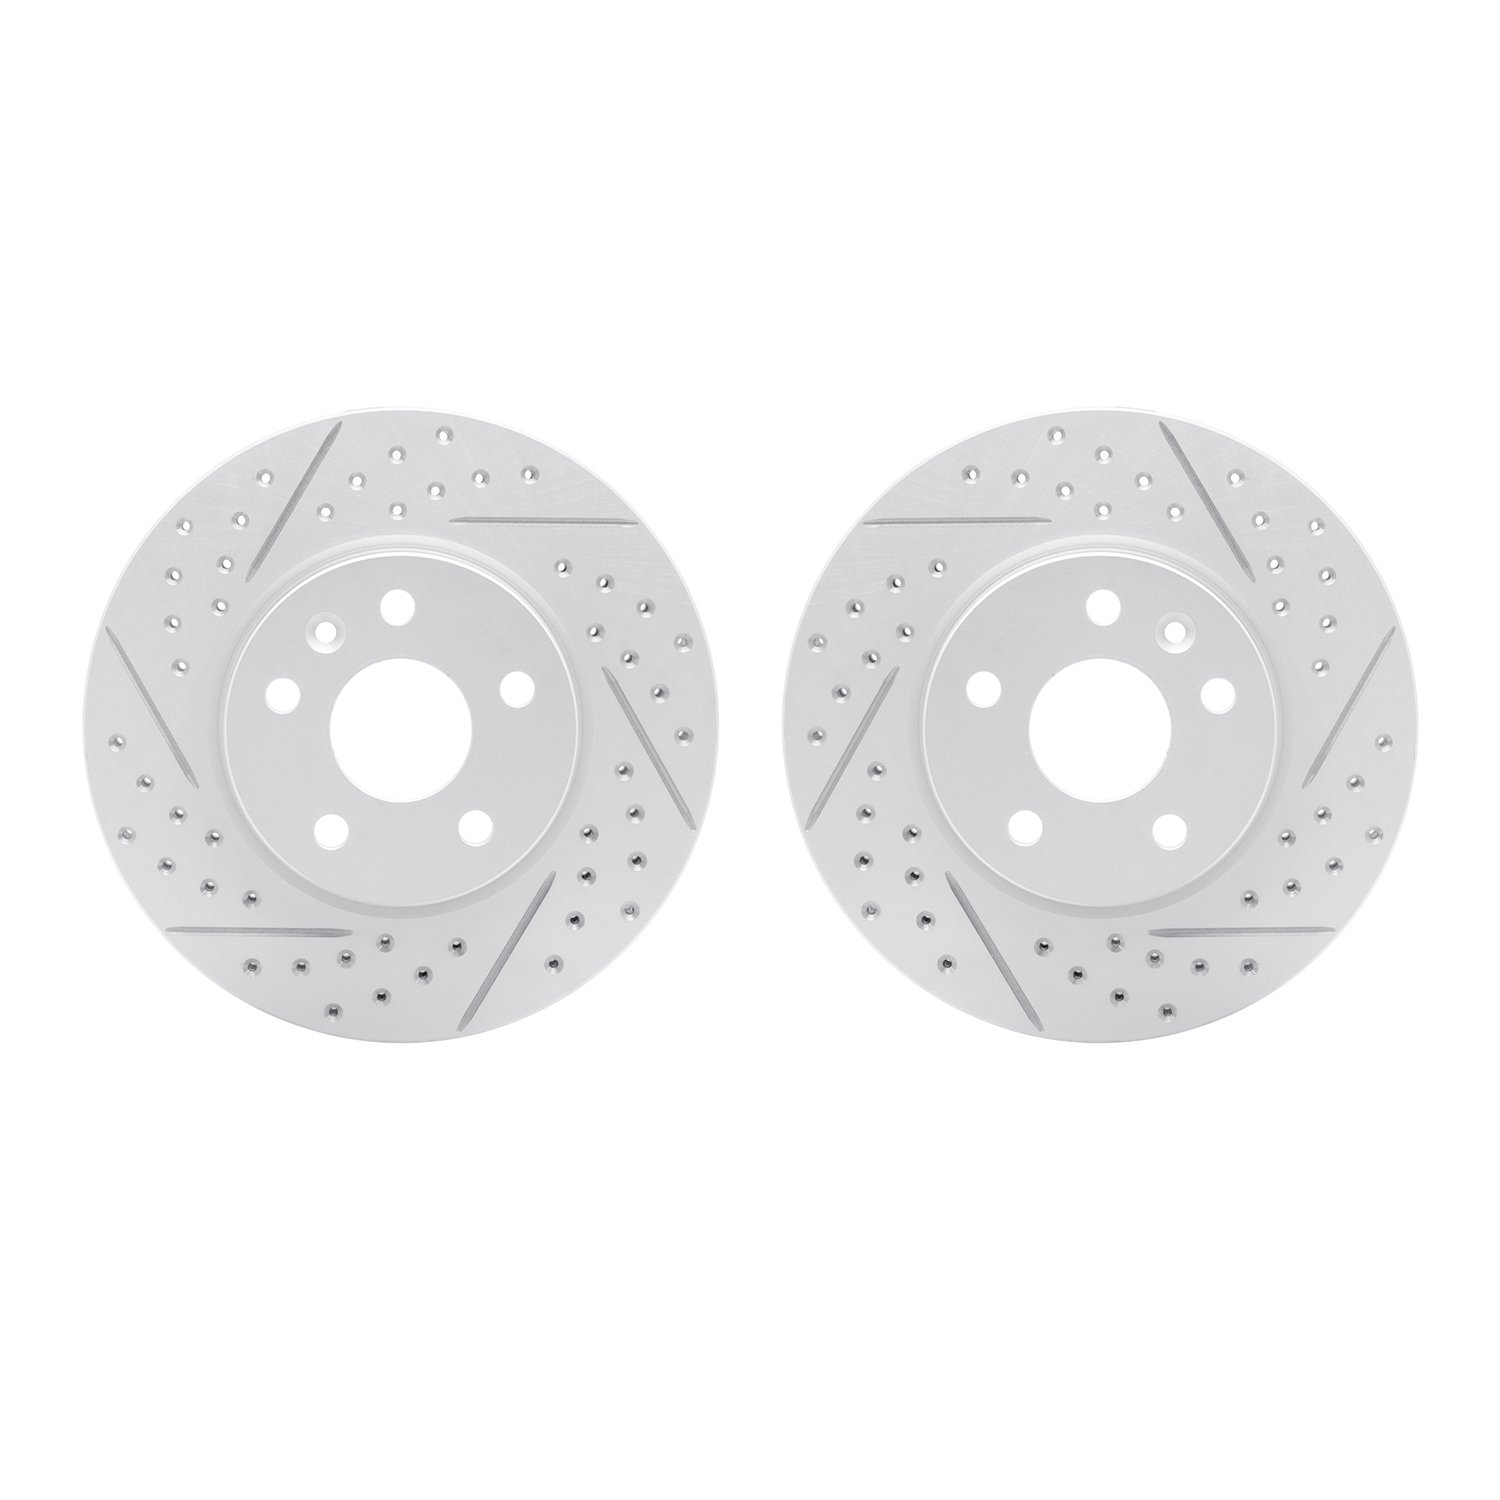 2002-47010 Geoperformance Drilled/Slotted Brake Rotors, Fits Select GM, Position: Front